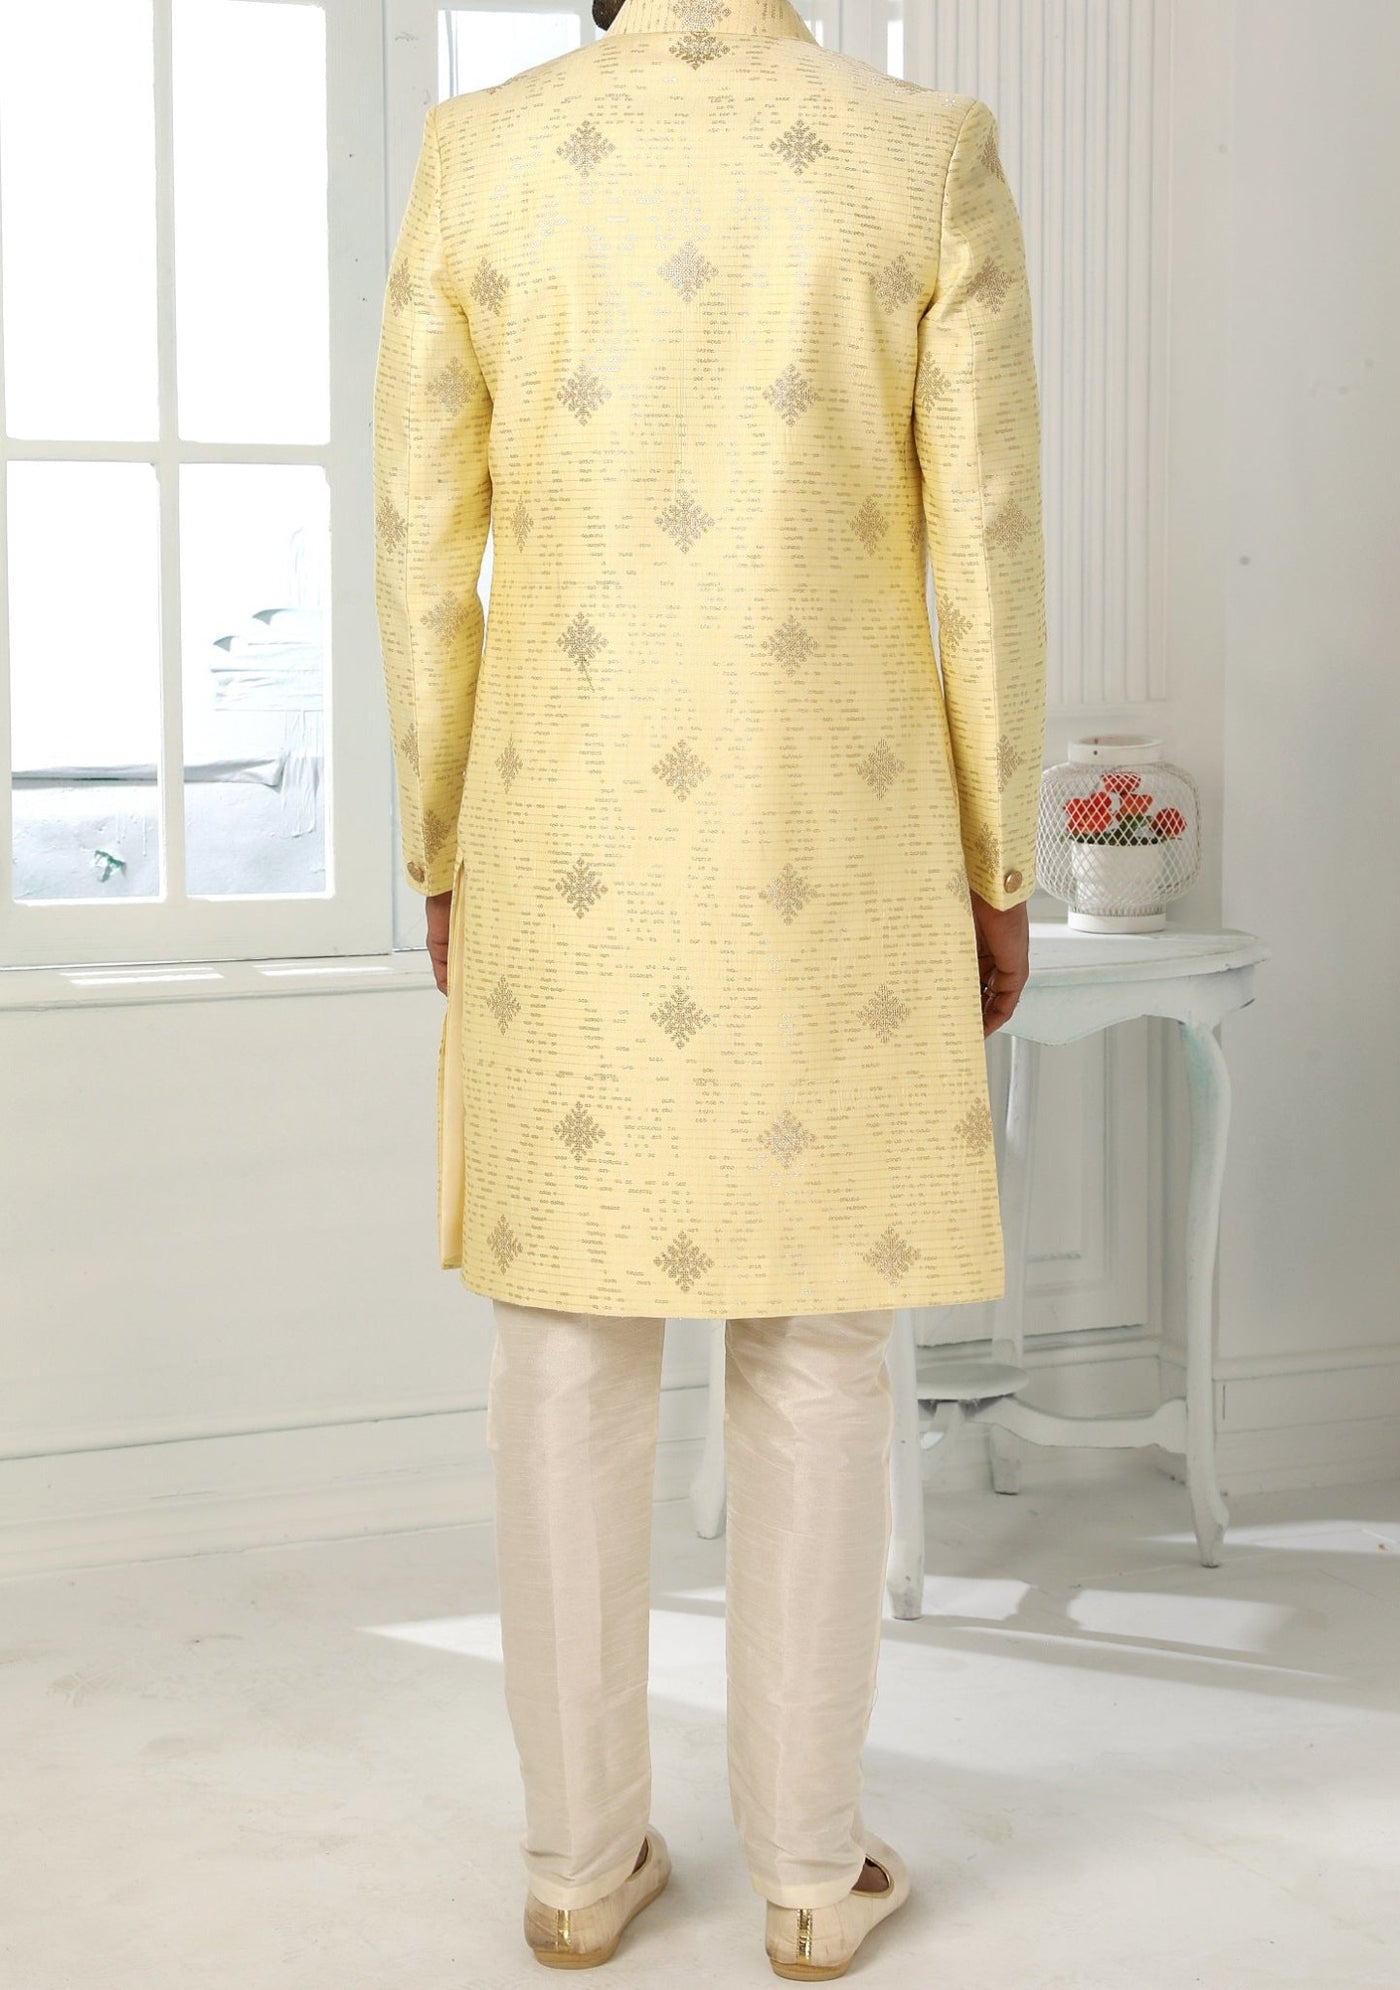 Men's Indo Western Party Wear Sherwani Suit With Jacket - db20437